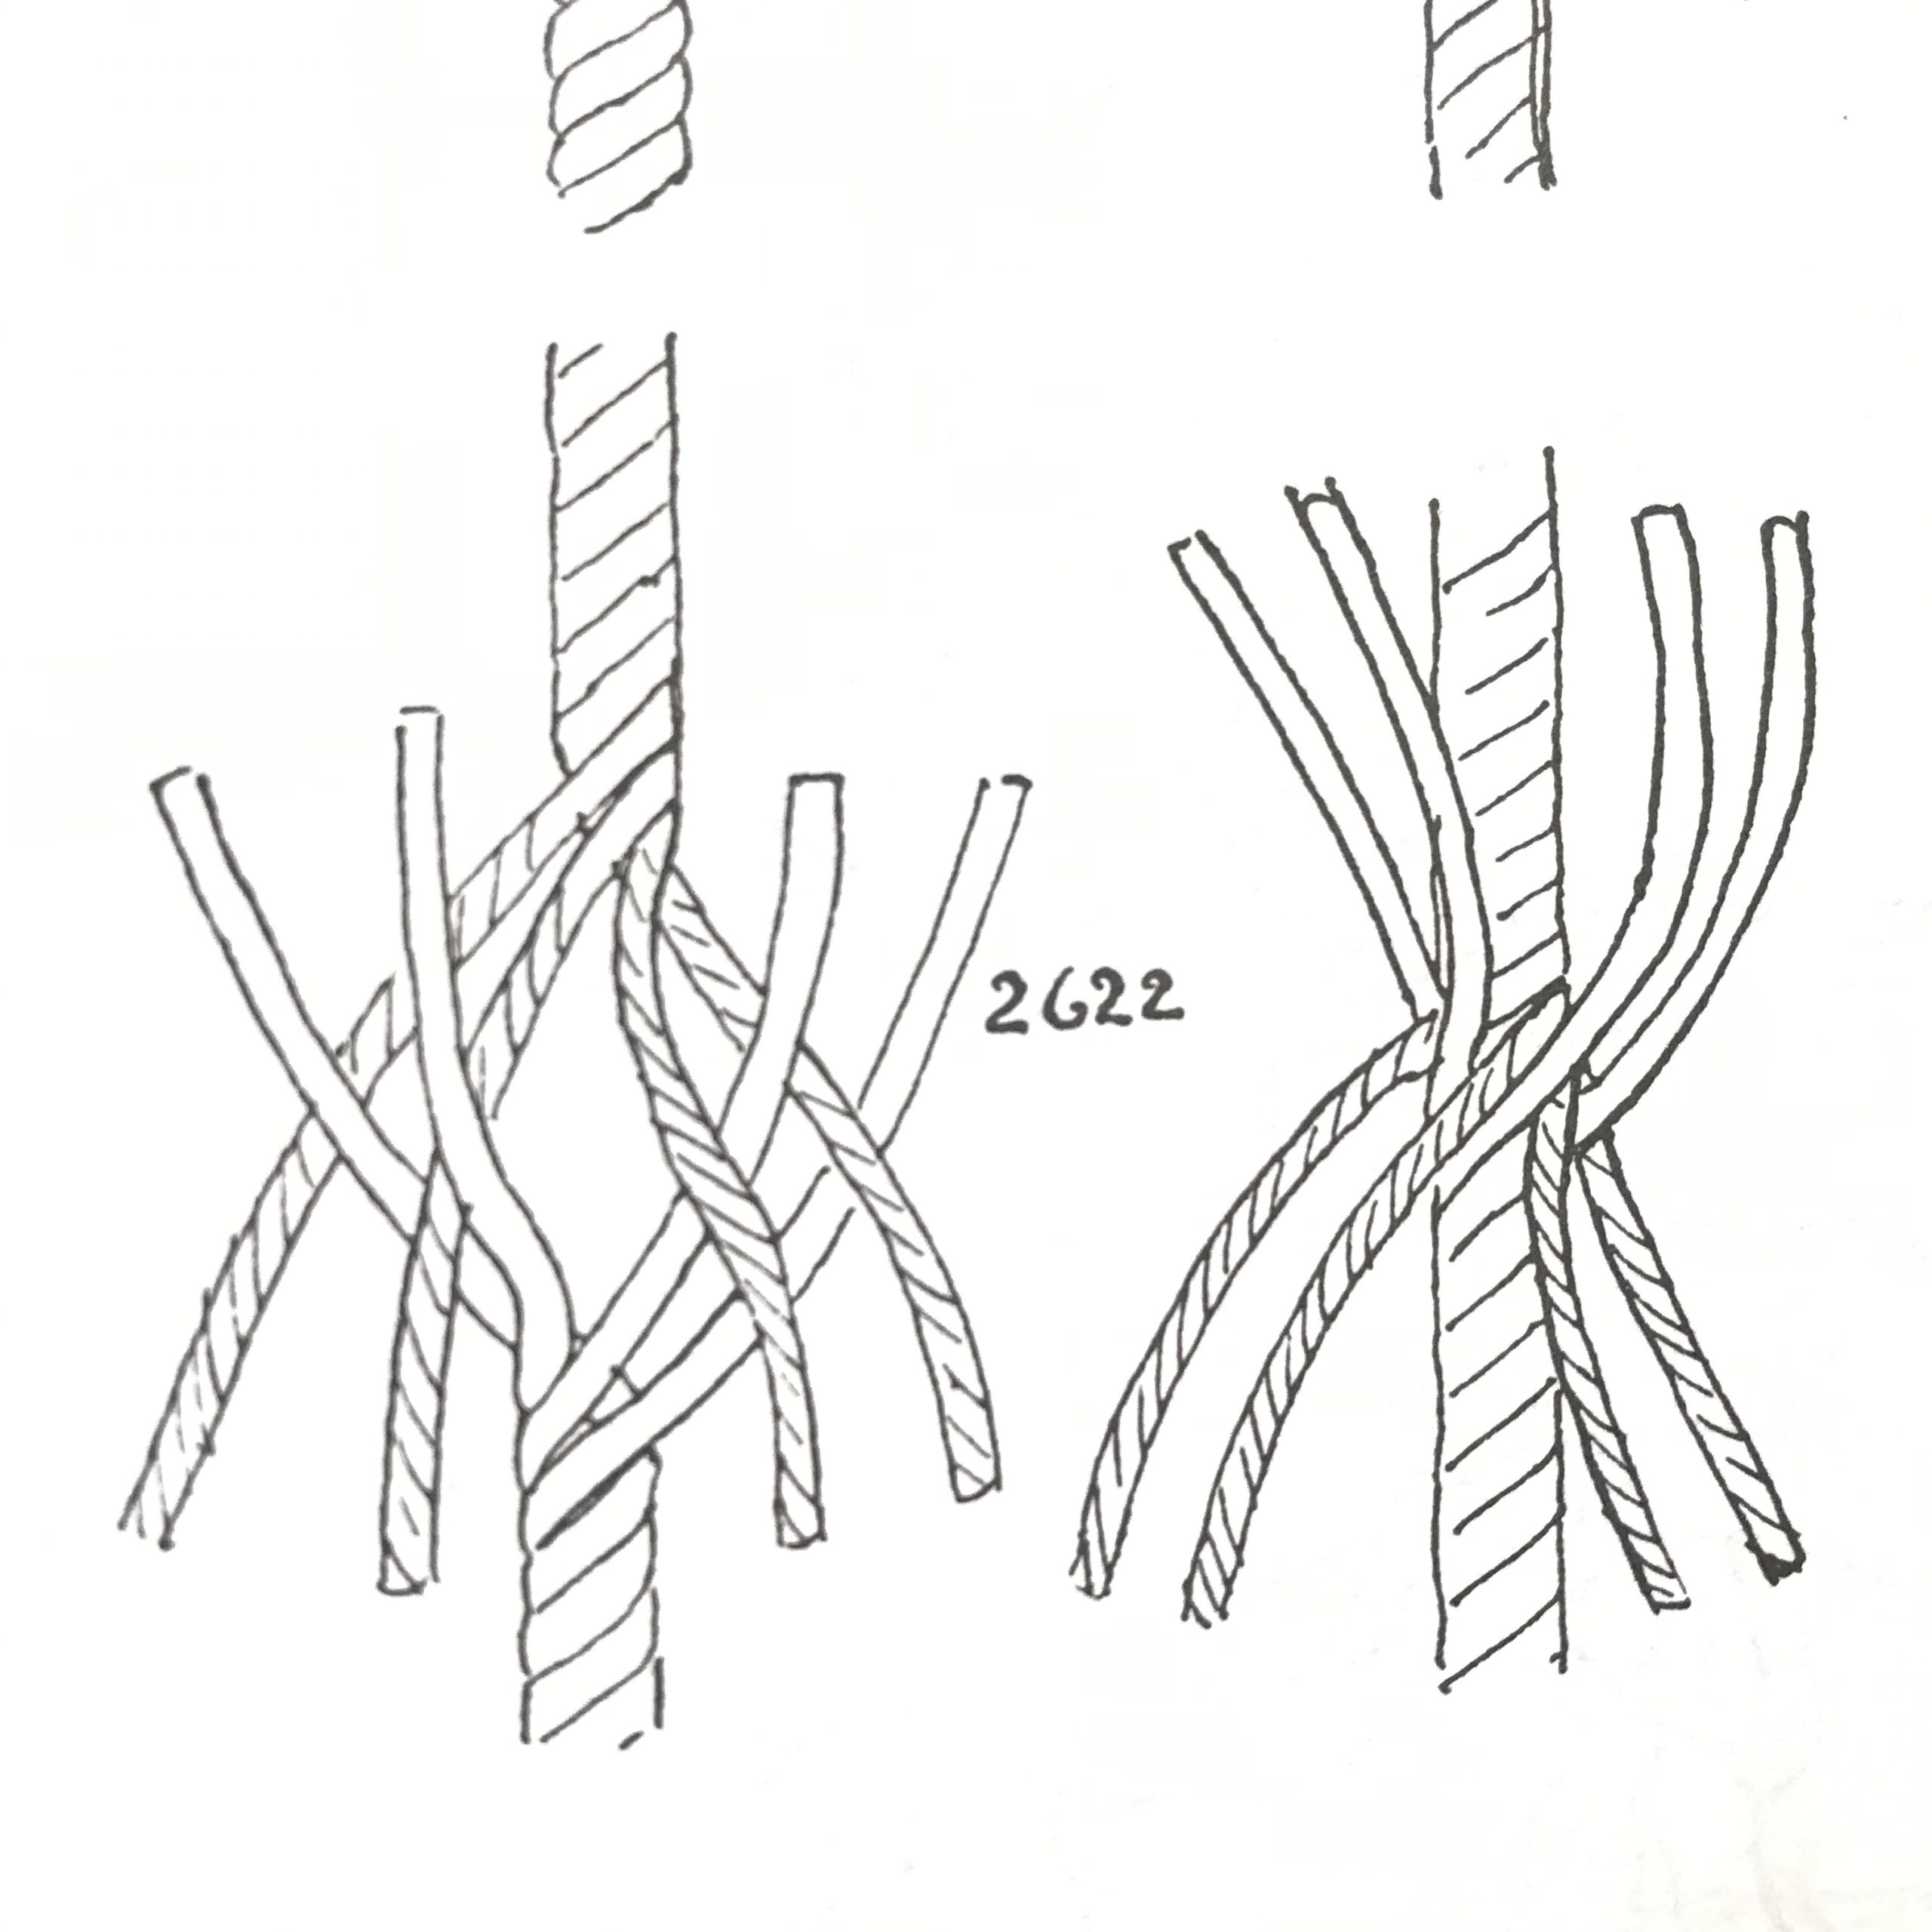 Knots/Rope splicing - Wikibooks, open books for an open world